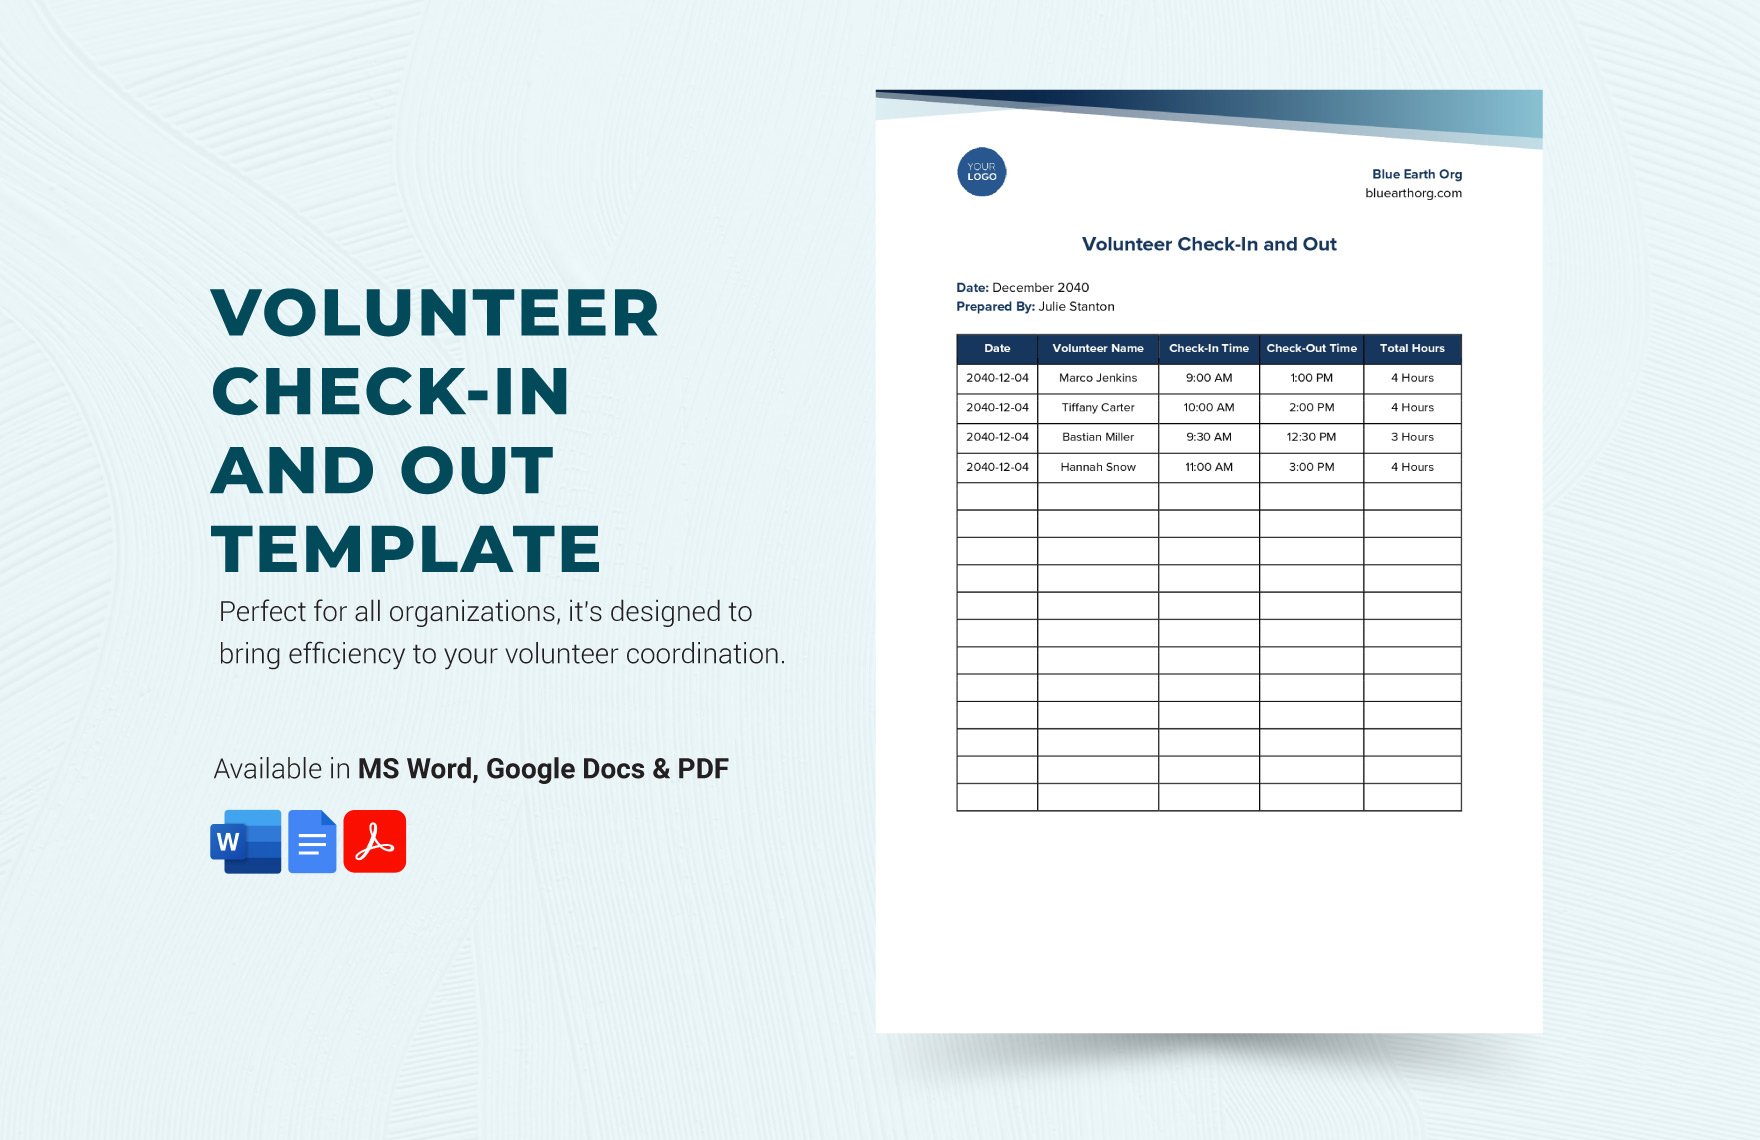 Volunteer Check-in and Out Template